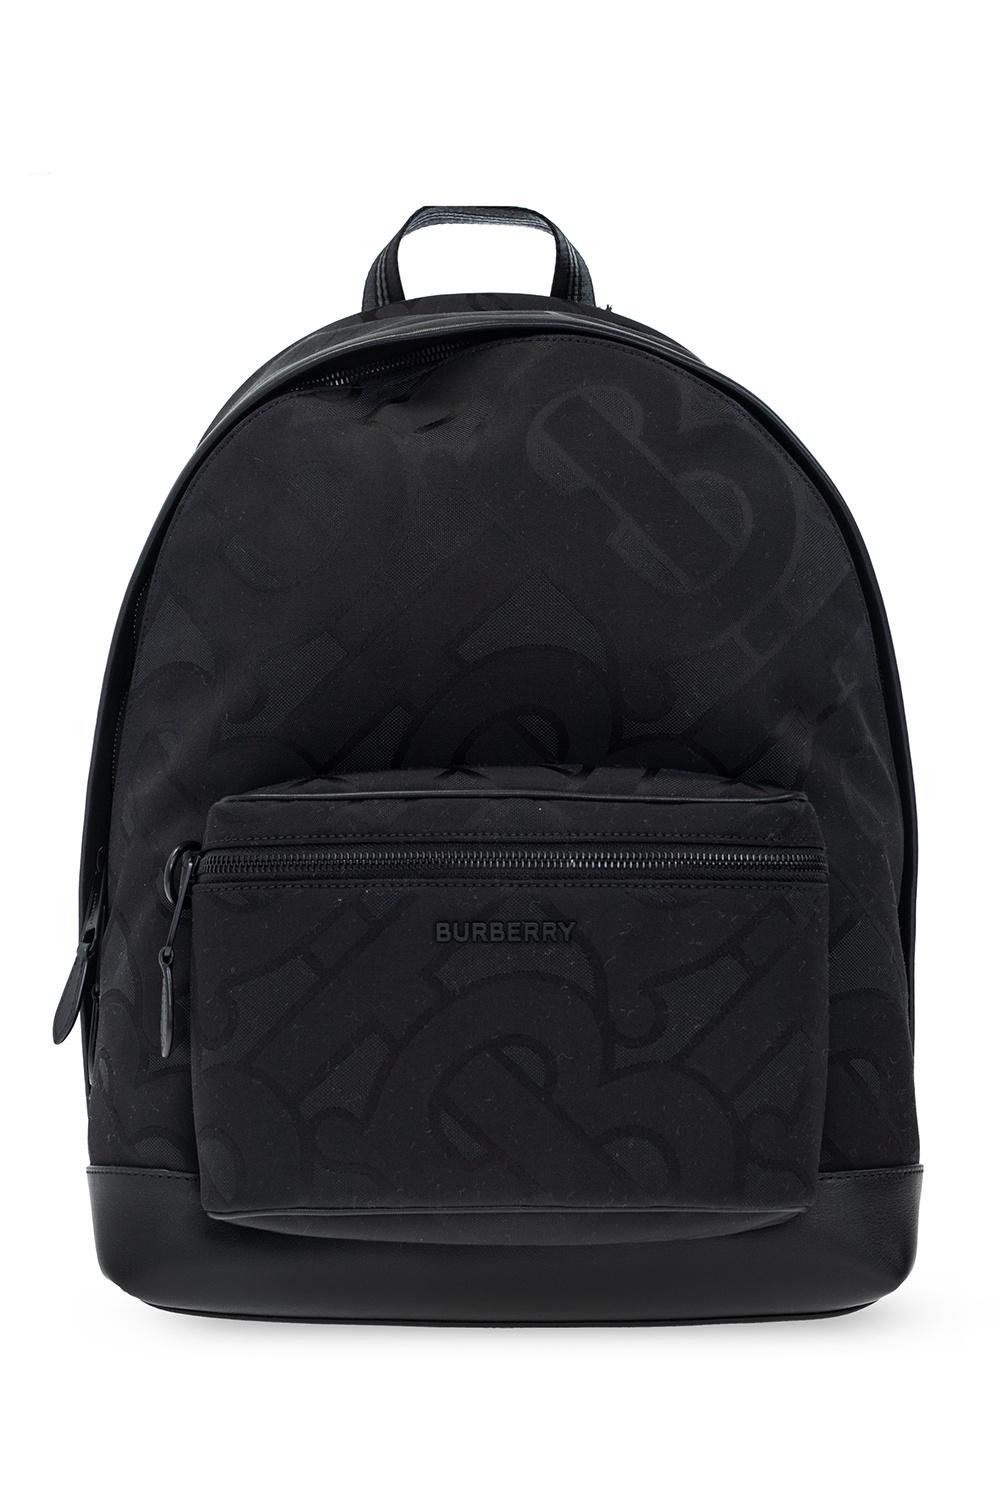 Burberry Backpack With Logo in Black for Men | Lyst